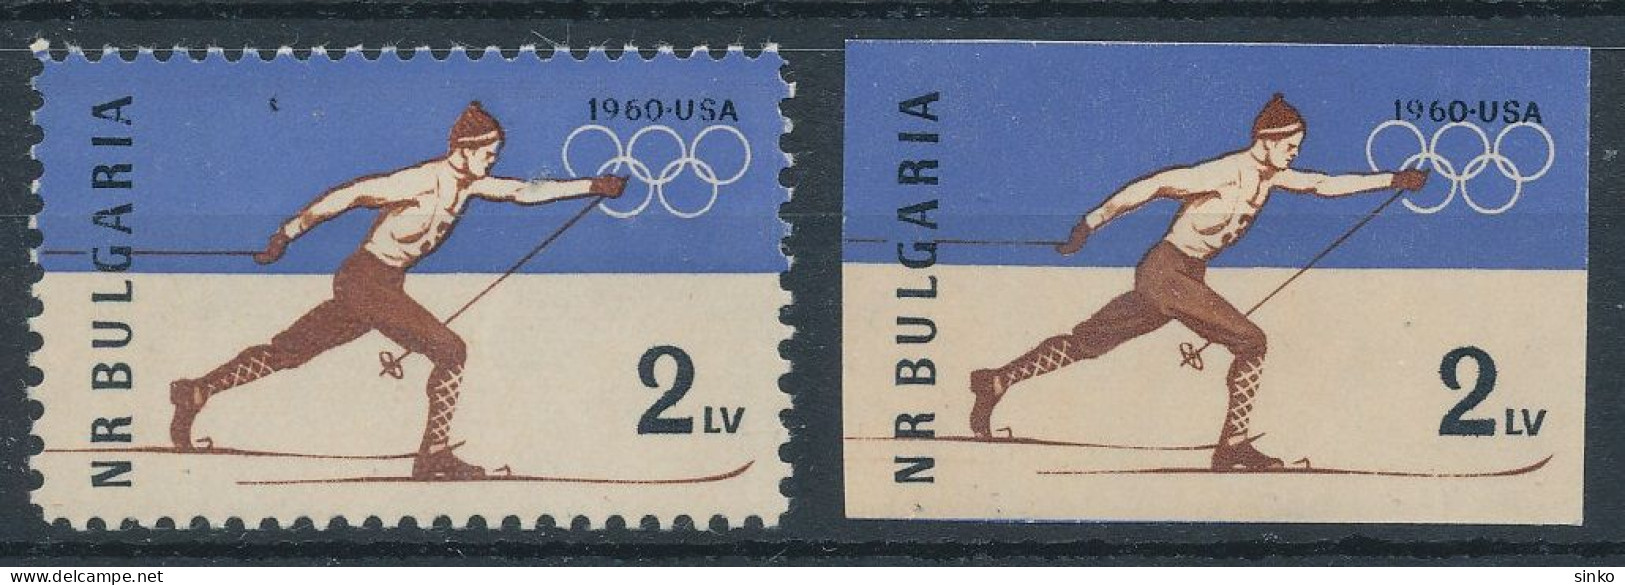 1960. Bulgaria - Olympic Games - Inverno1960: Squaw Valley